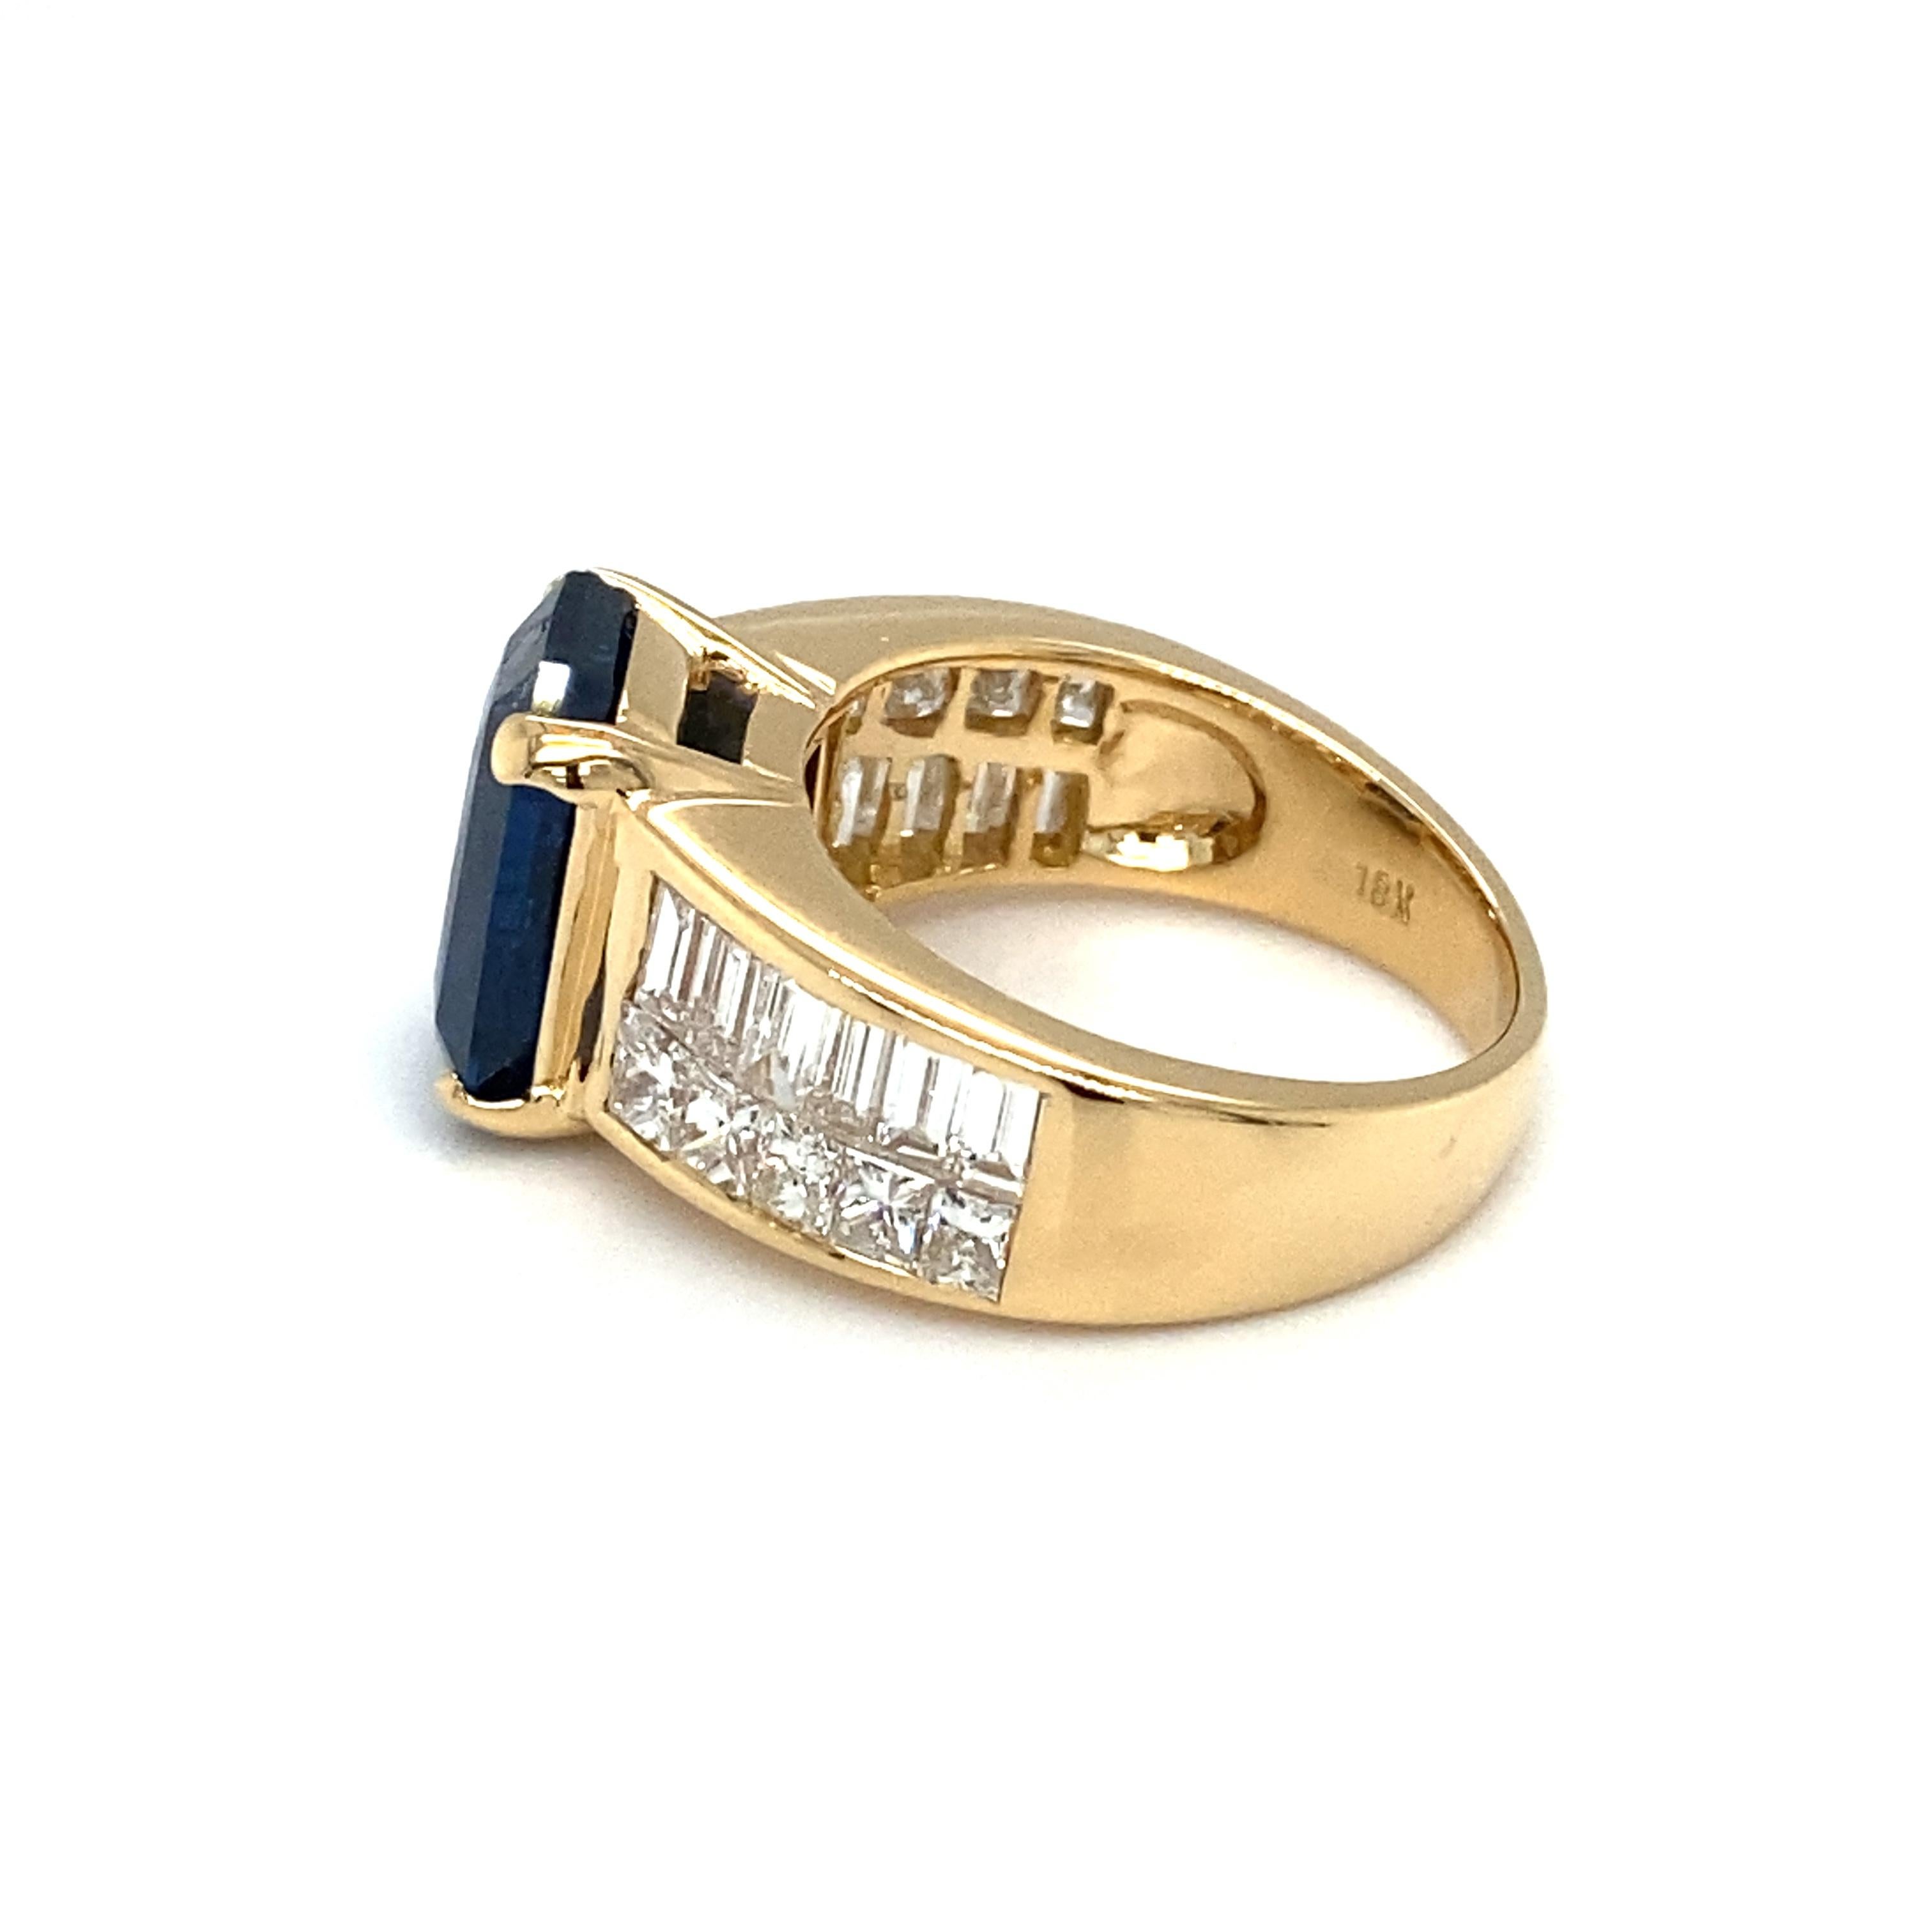 Modern GIA Certified 6.35 Carat Emerald Cut Sapphire Diamond Cocktail Ring in 18K Gold For Sale